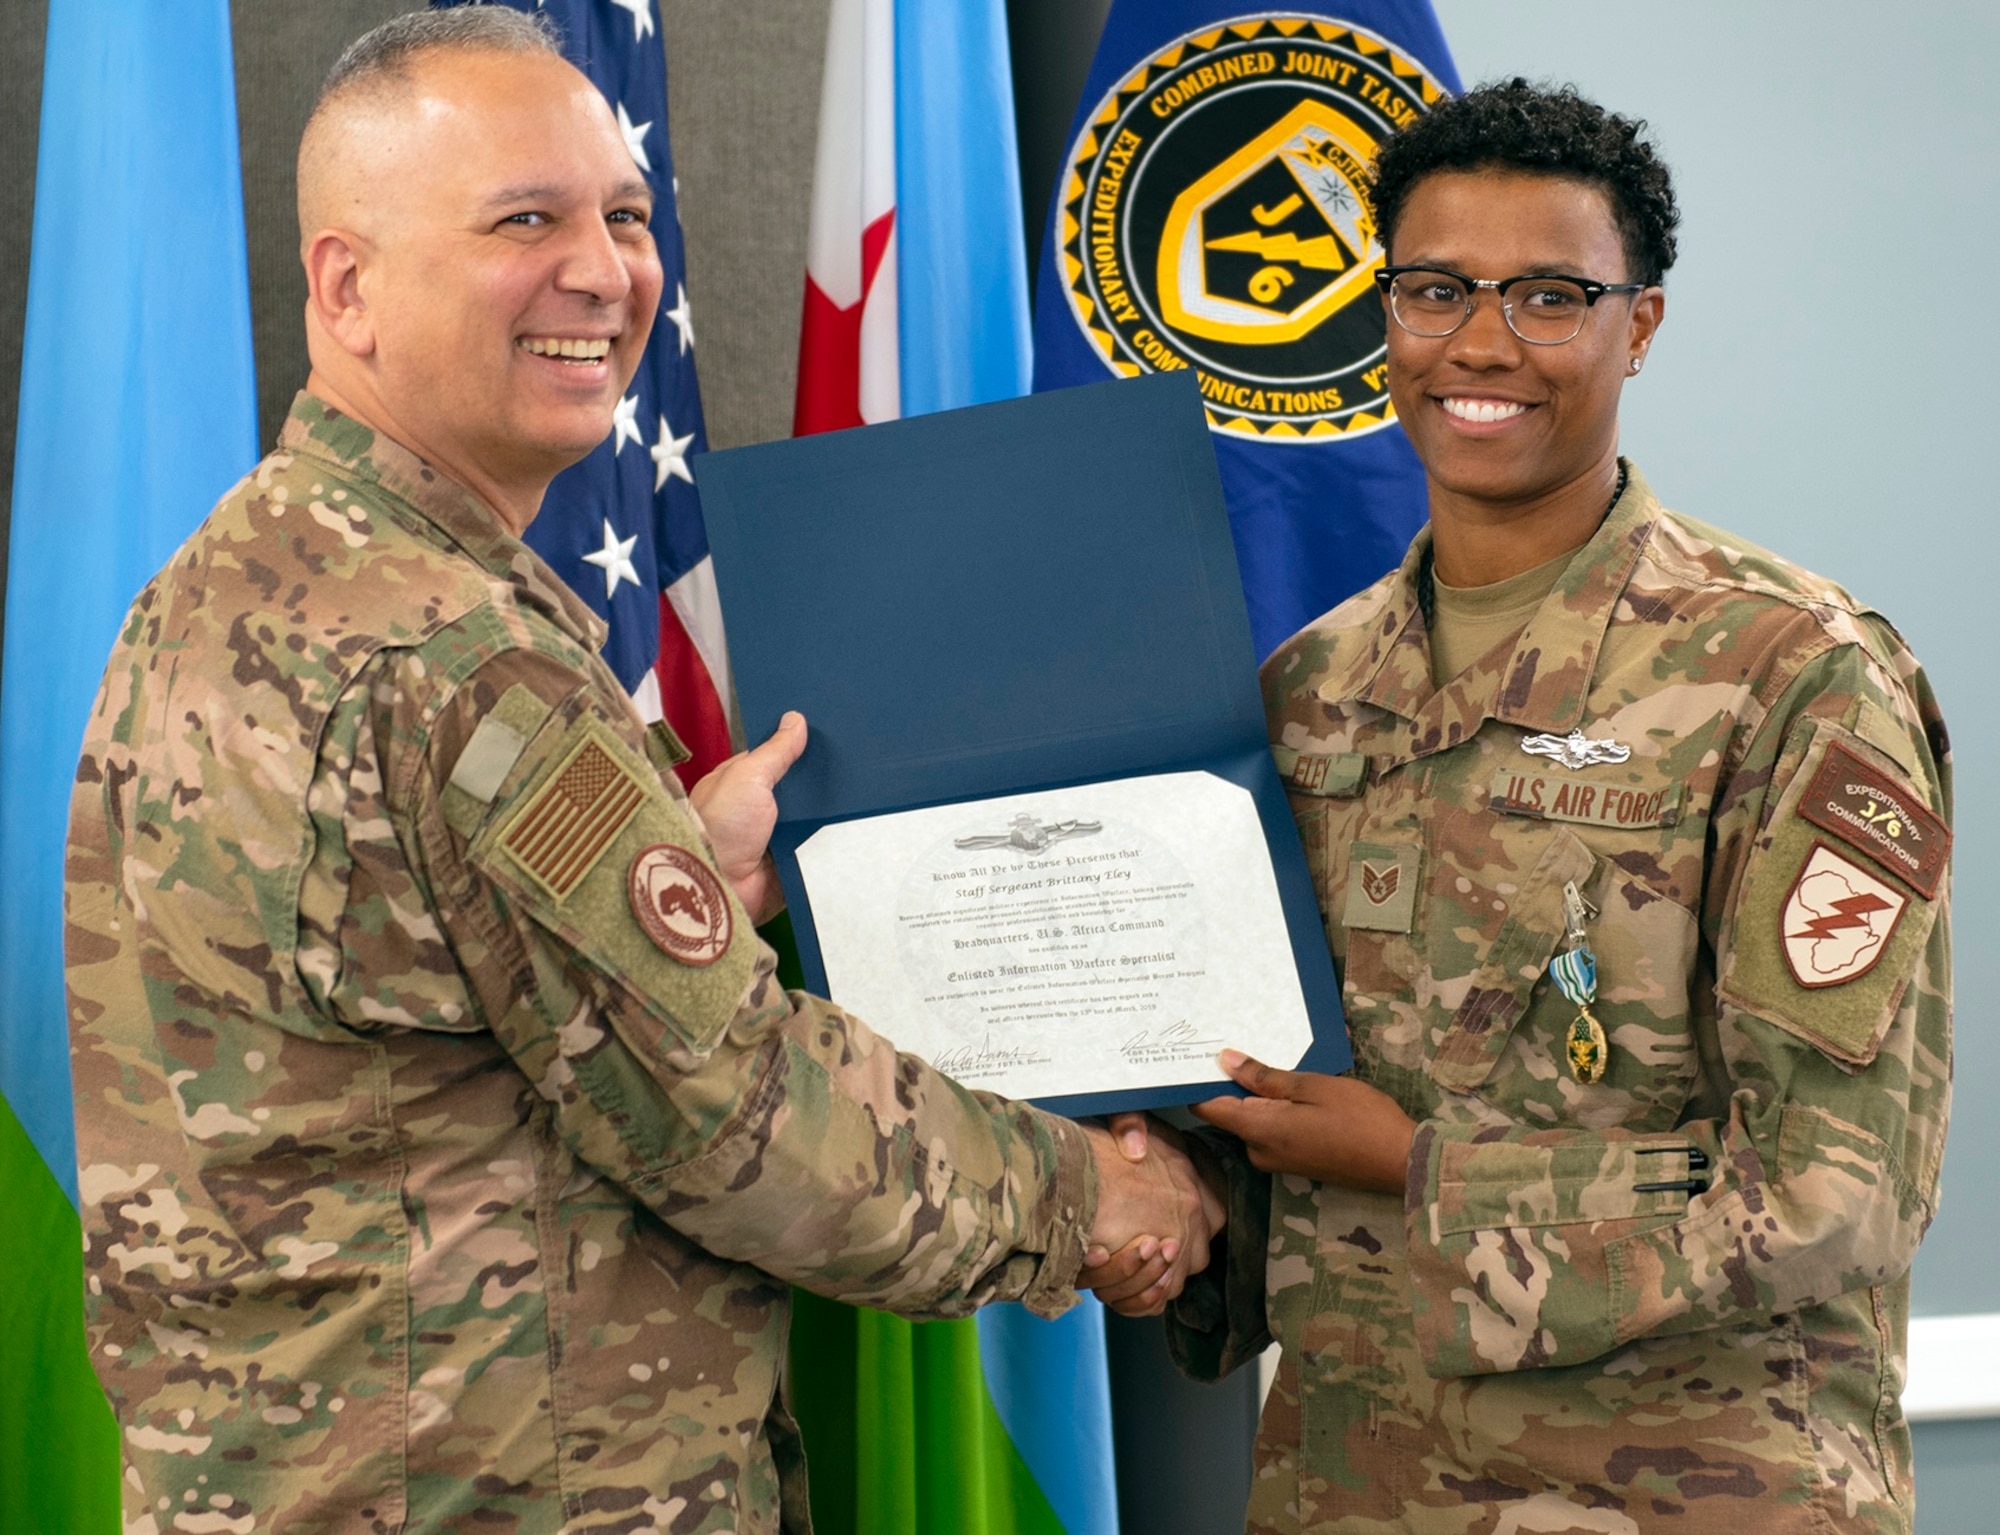 Air Force Col. Kjäll Gopaul (left), communications director for Combined Joint Task Force-Horn of Africa (CJTF-HOA), presents a U.S. Navy enlisted information warfare specialist (EIWS) certificate to Air Force Staff Sgt. Brittany Eley, Joint Network Control Center team lead assigned to CJTF-HOA, at Camp Lemonnier, Djibouti, April 1. Eley has been recognized as the first sister-service EIWS in CJTF-HOA, which signifies that an eligible Sailor has achieved a level of excellence and proficiency in their rating.